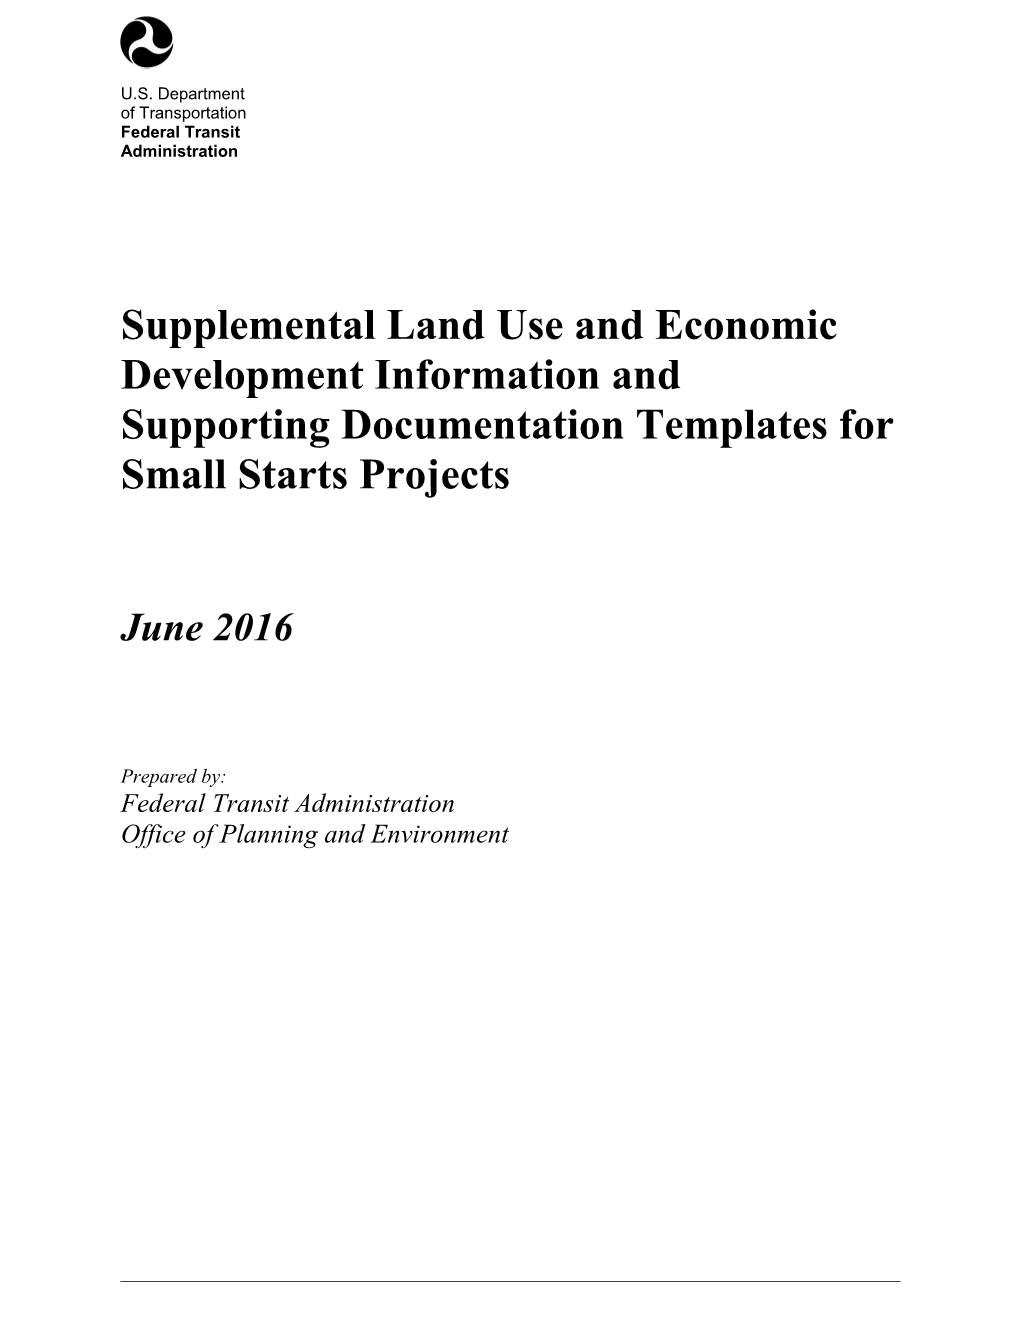 Supplemental Land Use and Economic Development Information and Supporting Documentation